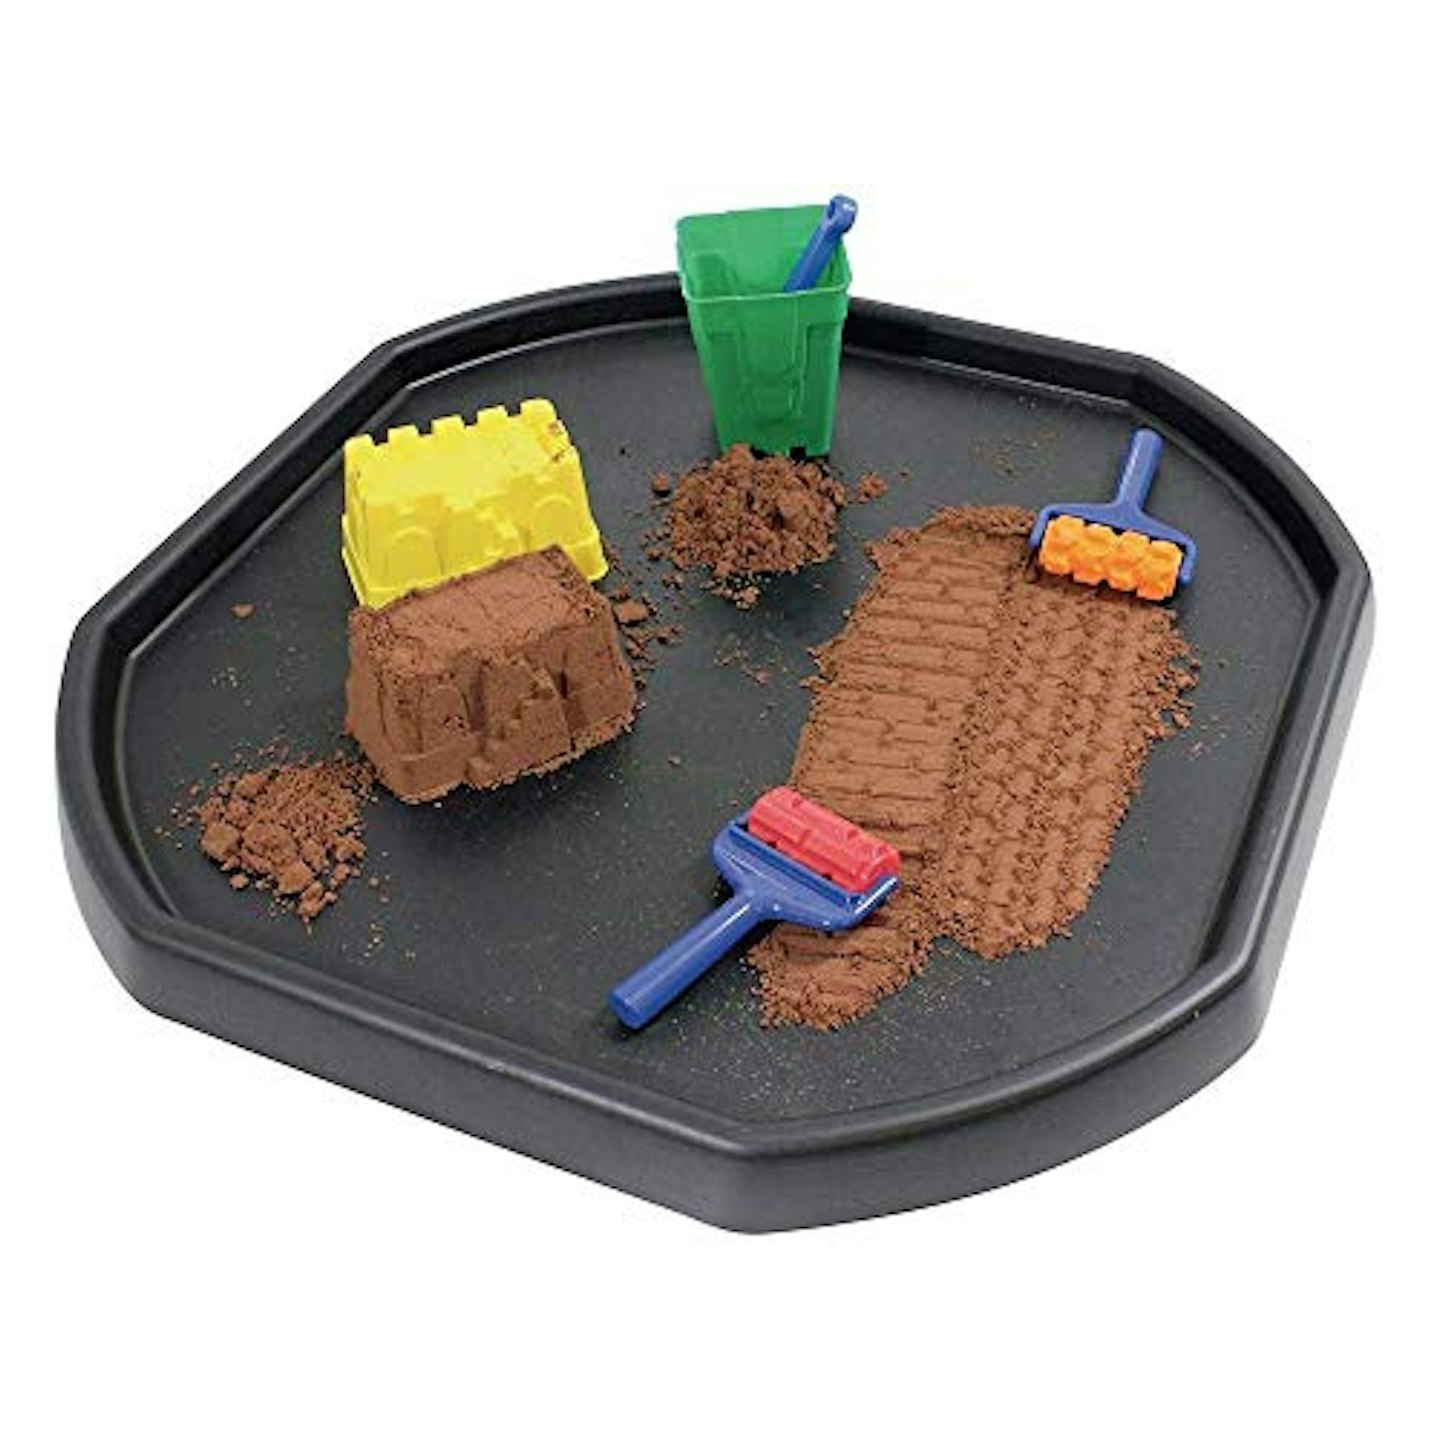 Tuff tray: what is it and where to buy one